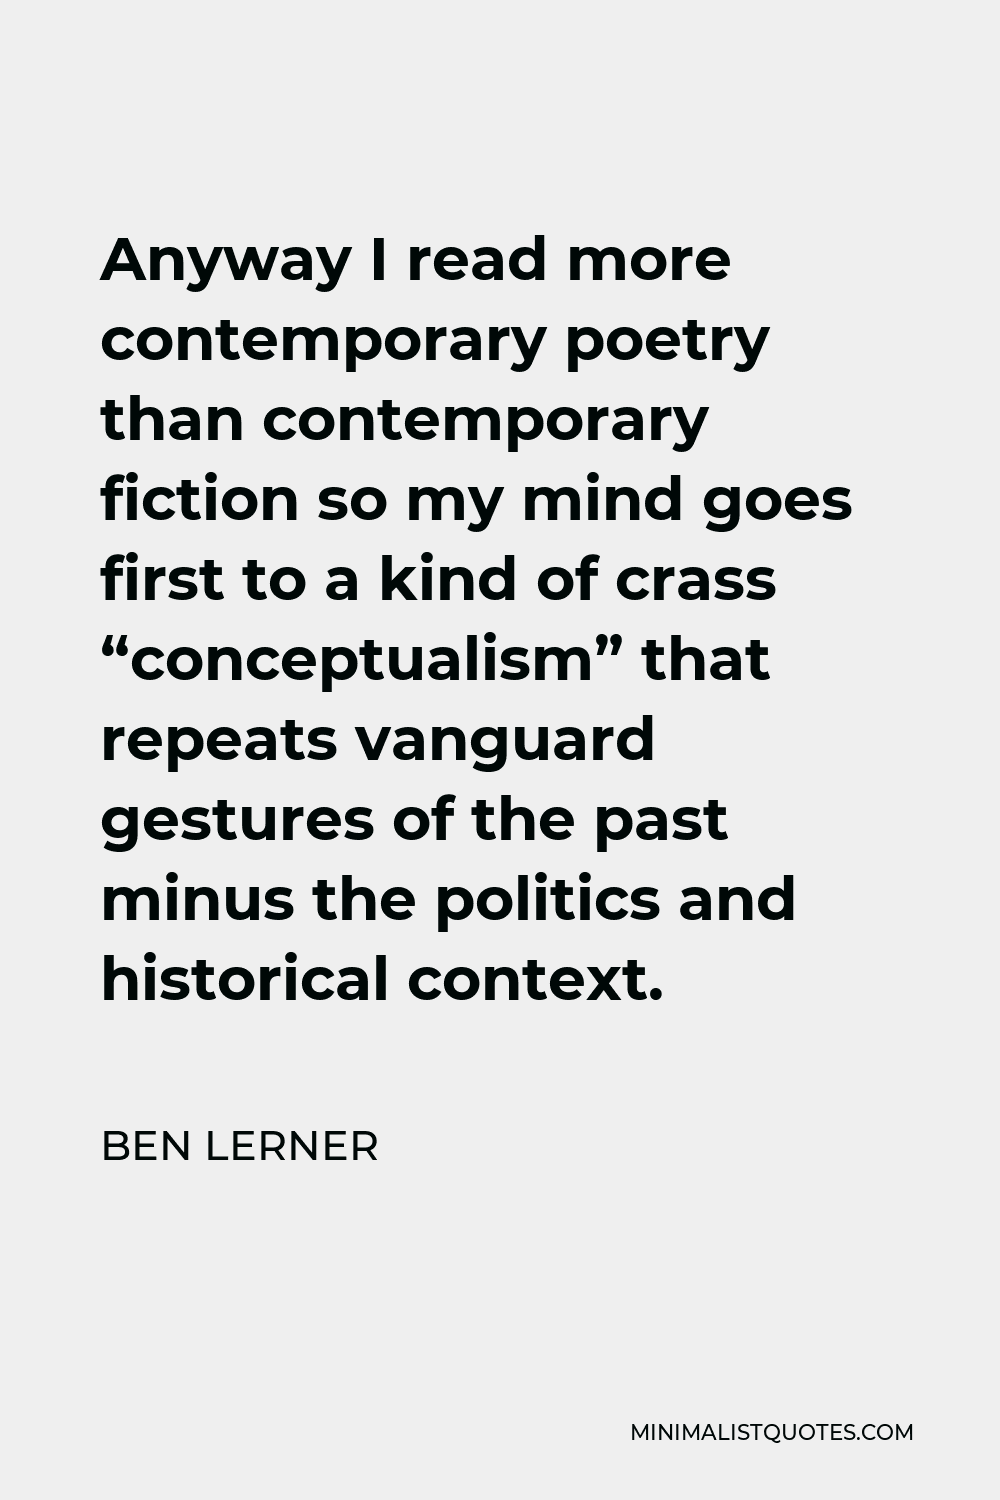 Ben Lerner Quote - Anyway I read more contemporary poetry than contemporary fiction so my mind goes first to a kind of crass “conceptualism” that repeats vanguard gestures of the past minus the politics and historical context.